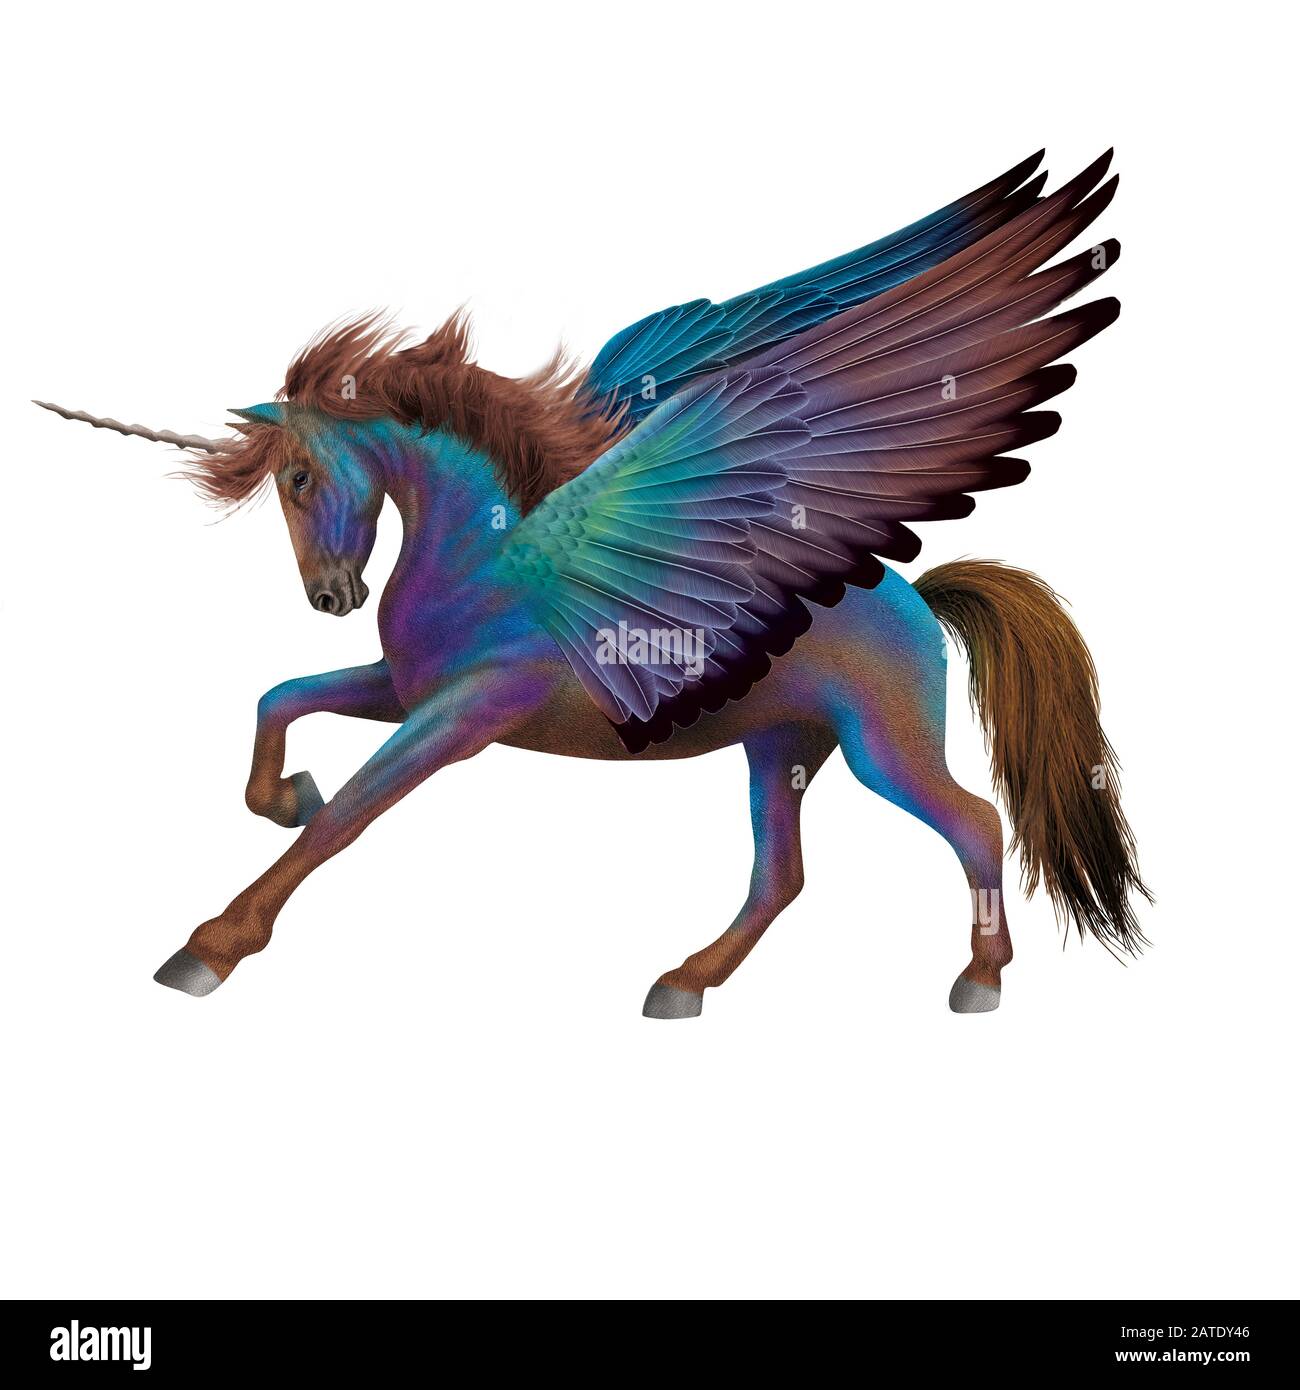 real unicorns found alive with wings